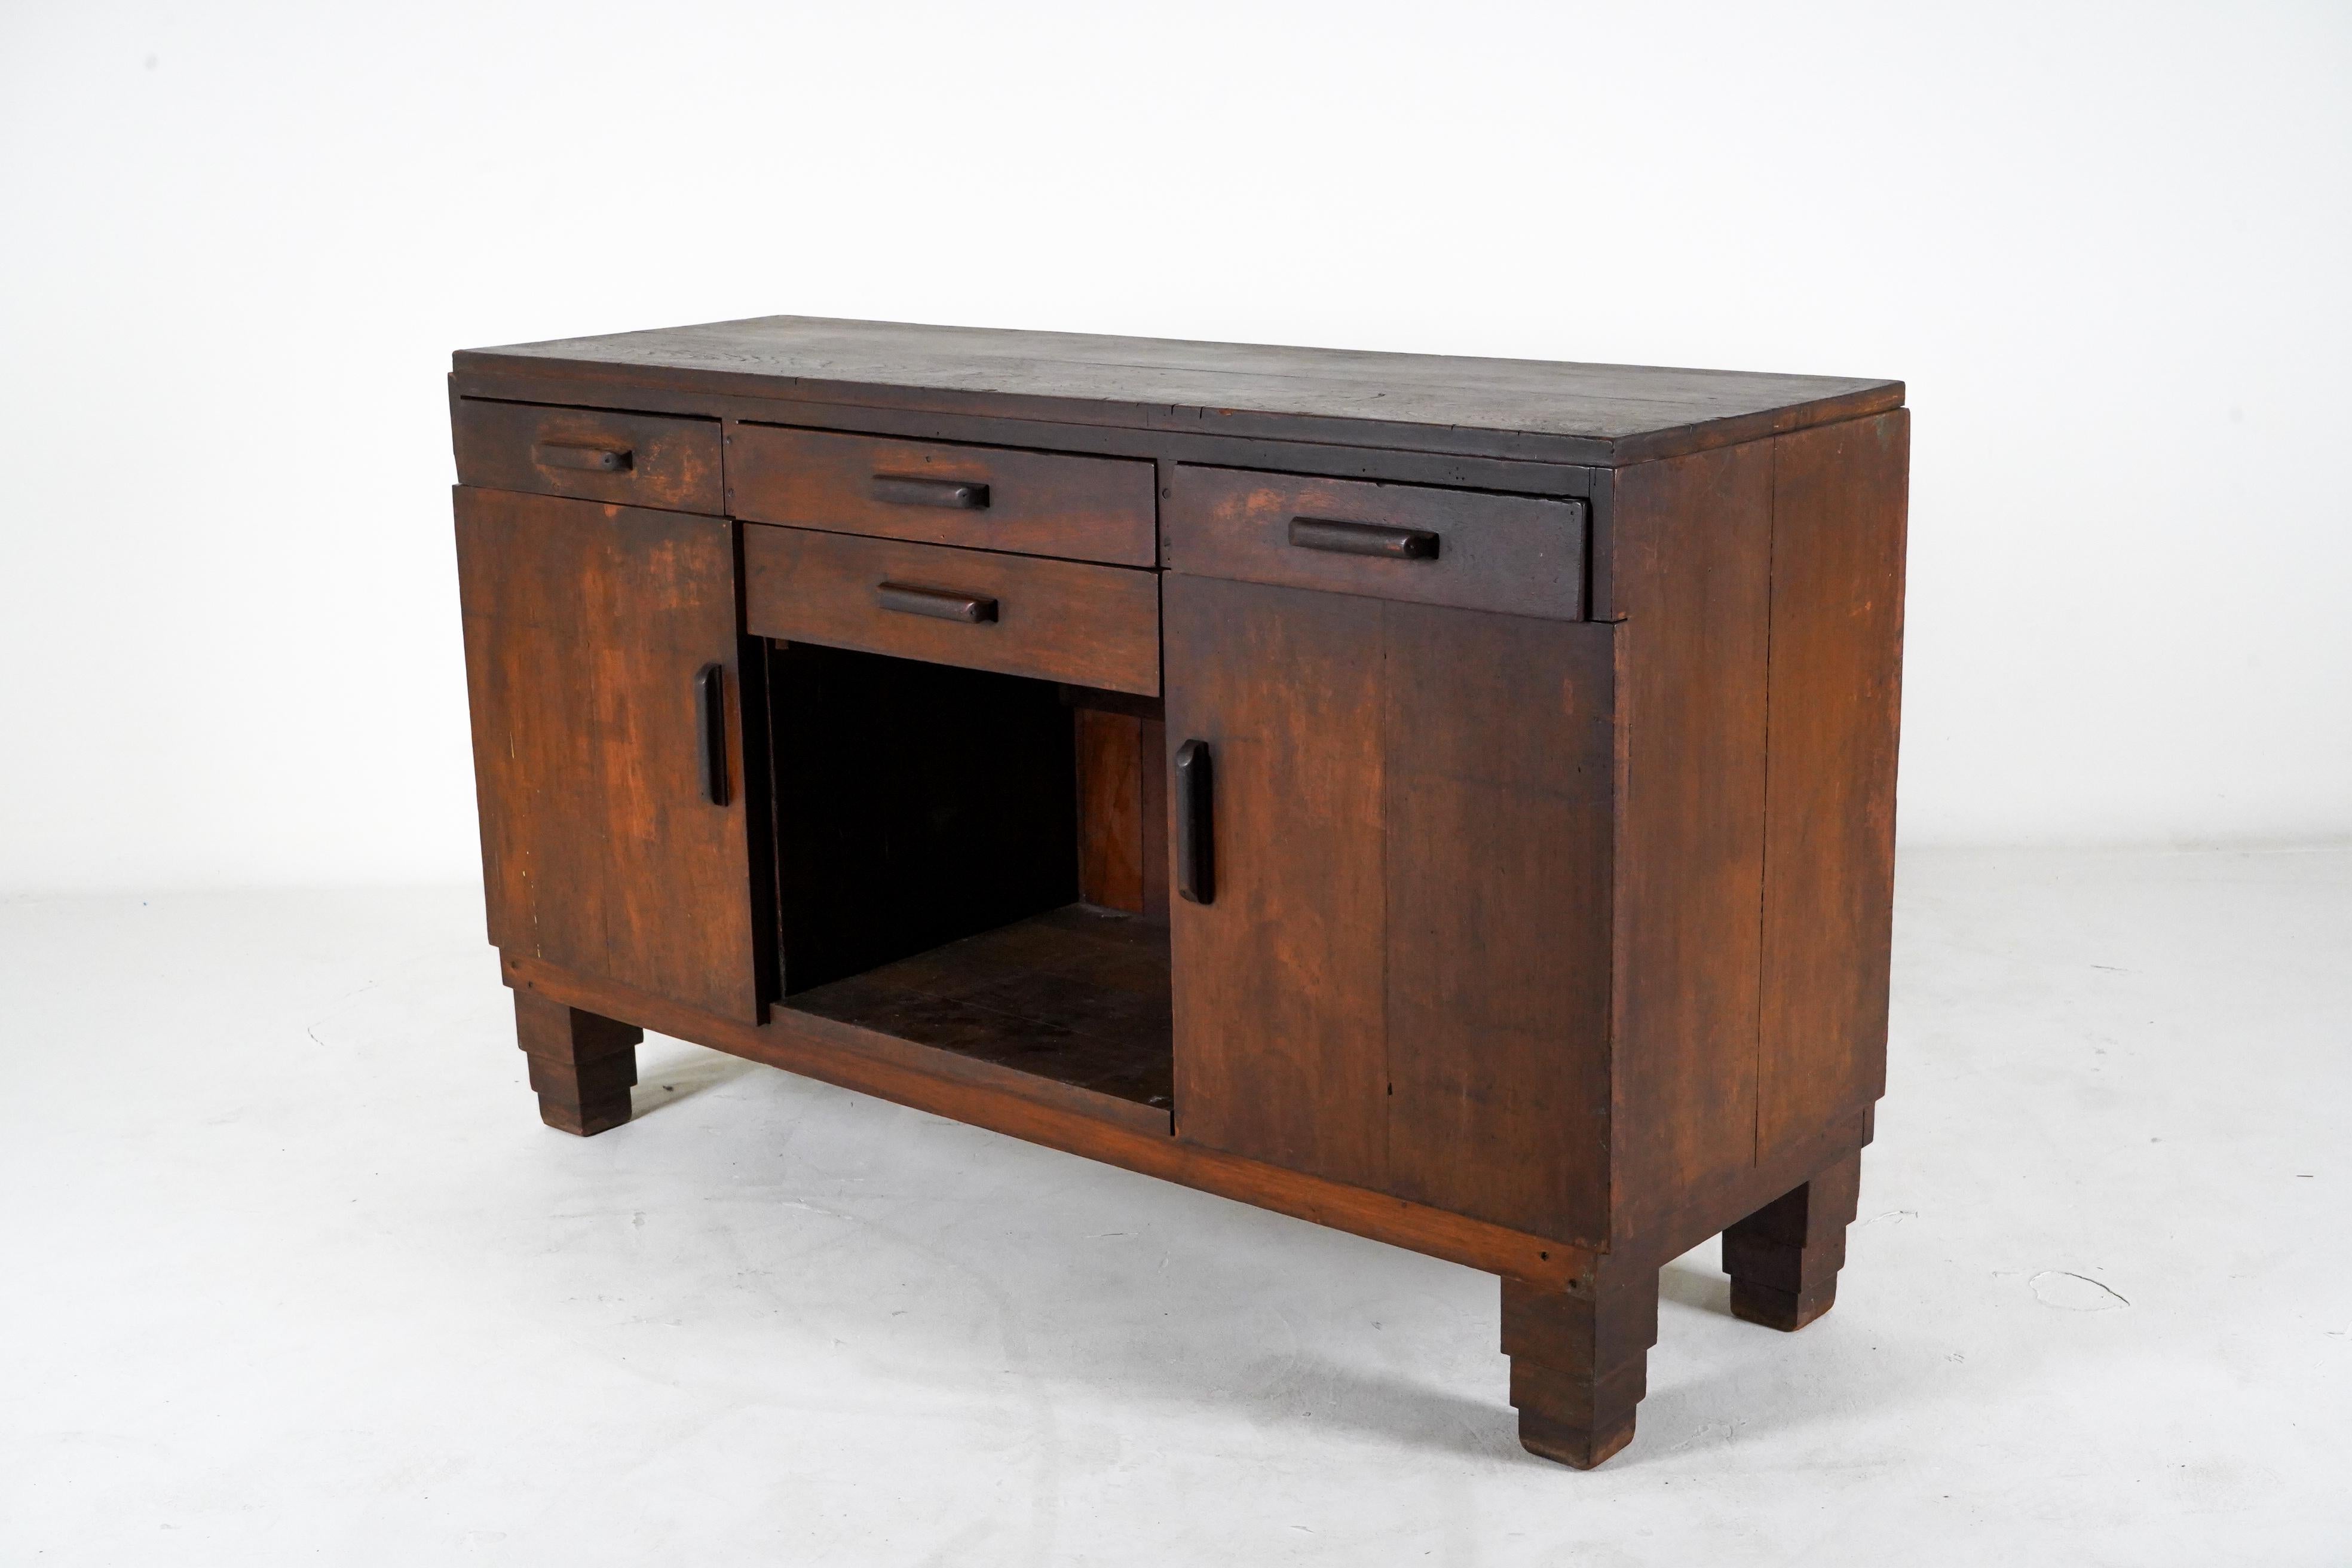 20th Century A British Colonial Teak Wood Shop Counter For Sale